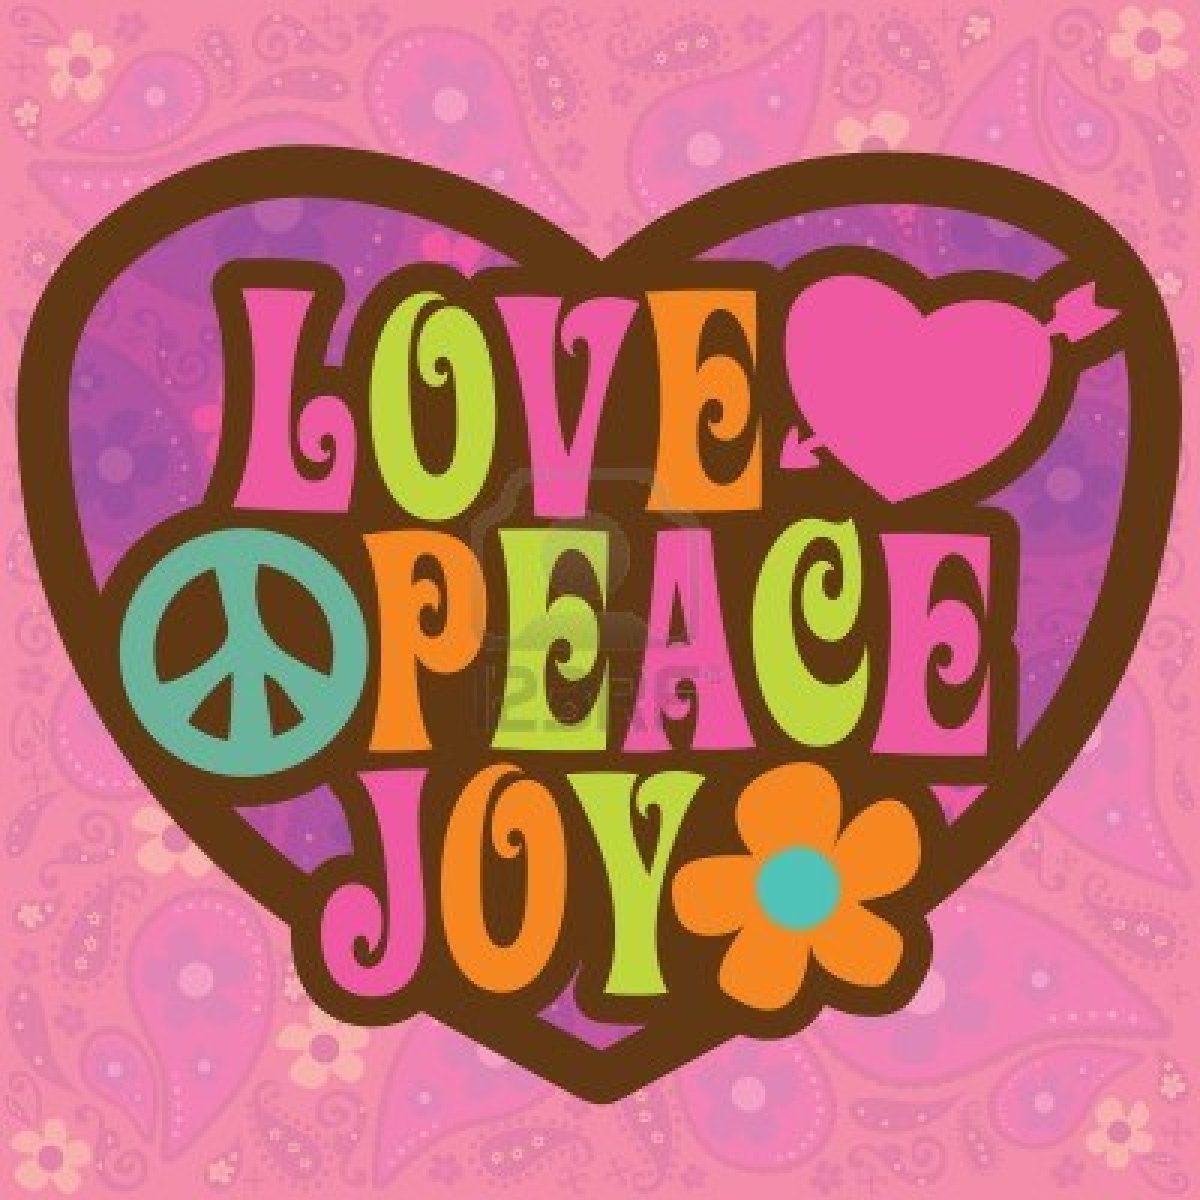 Peace Image Love And Joy HD Wallpaper Background